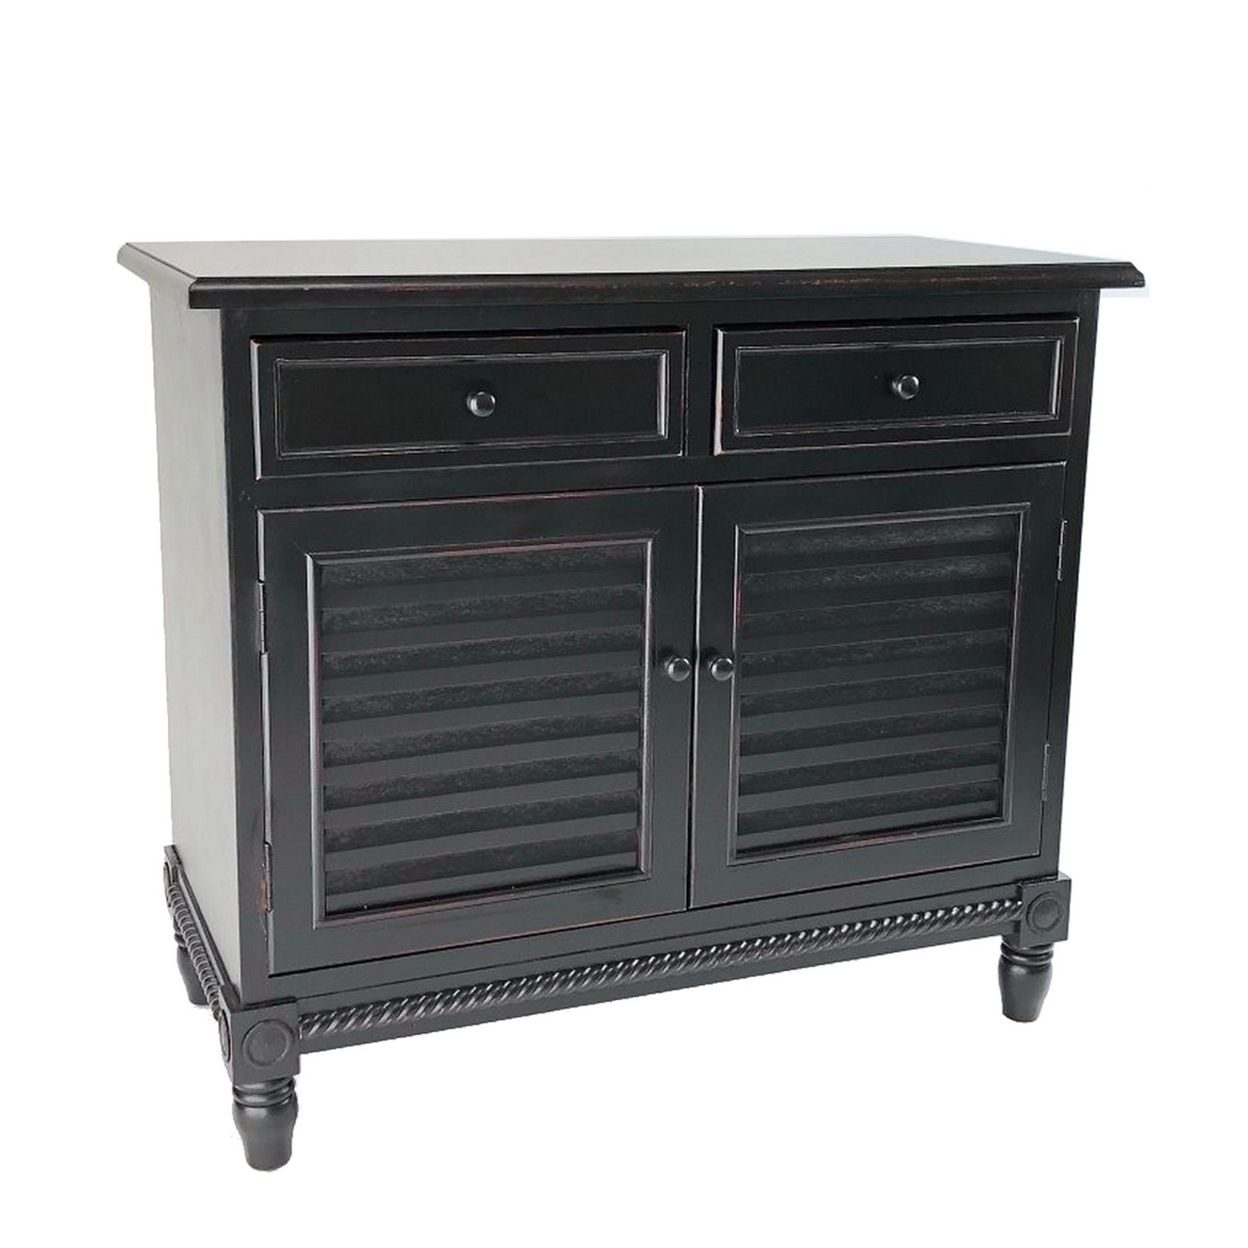 2 Door Wooden Cabinet With Horizontal Slatted Front And Round Knob, Black- Saltoro Sherpi